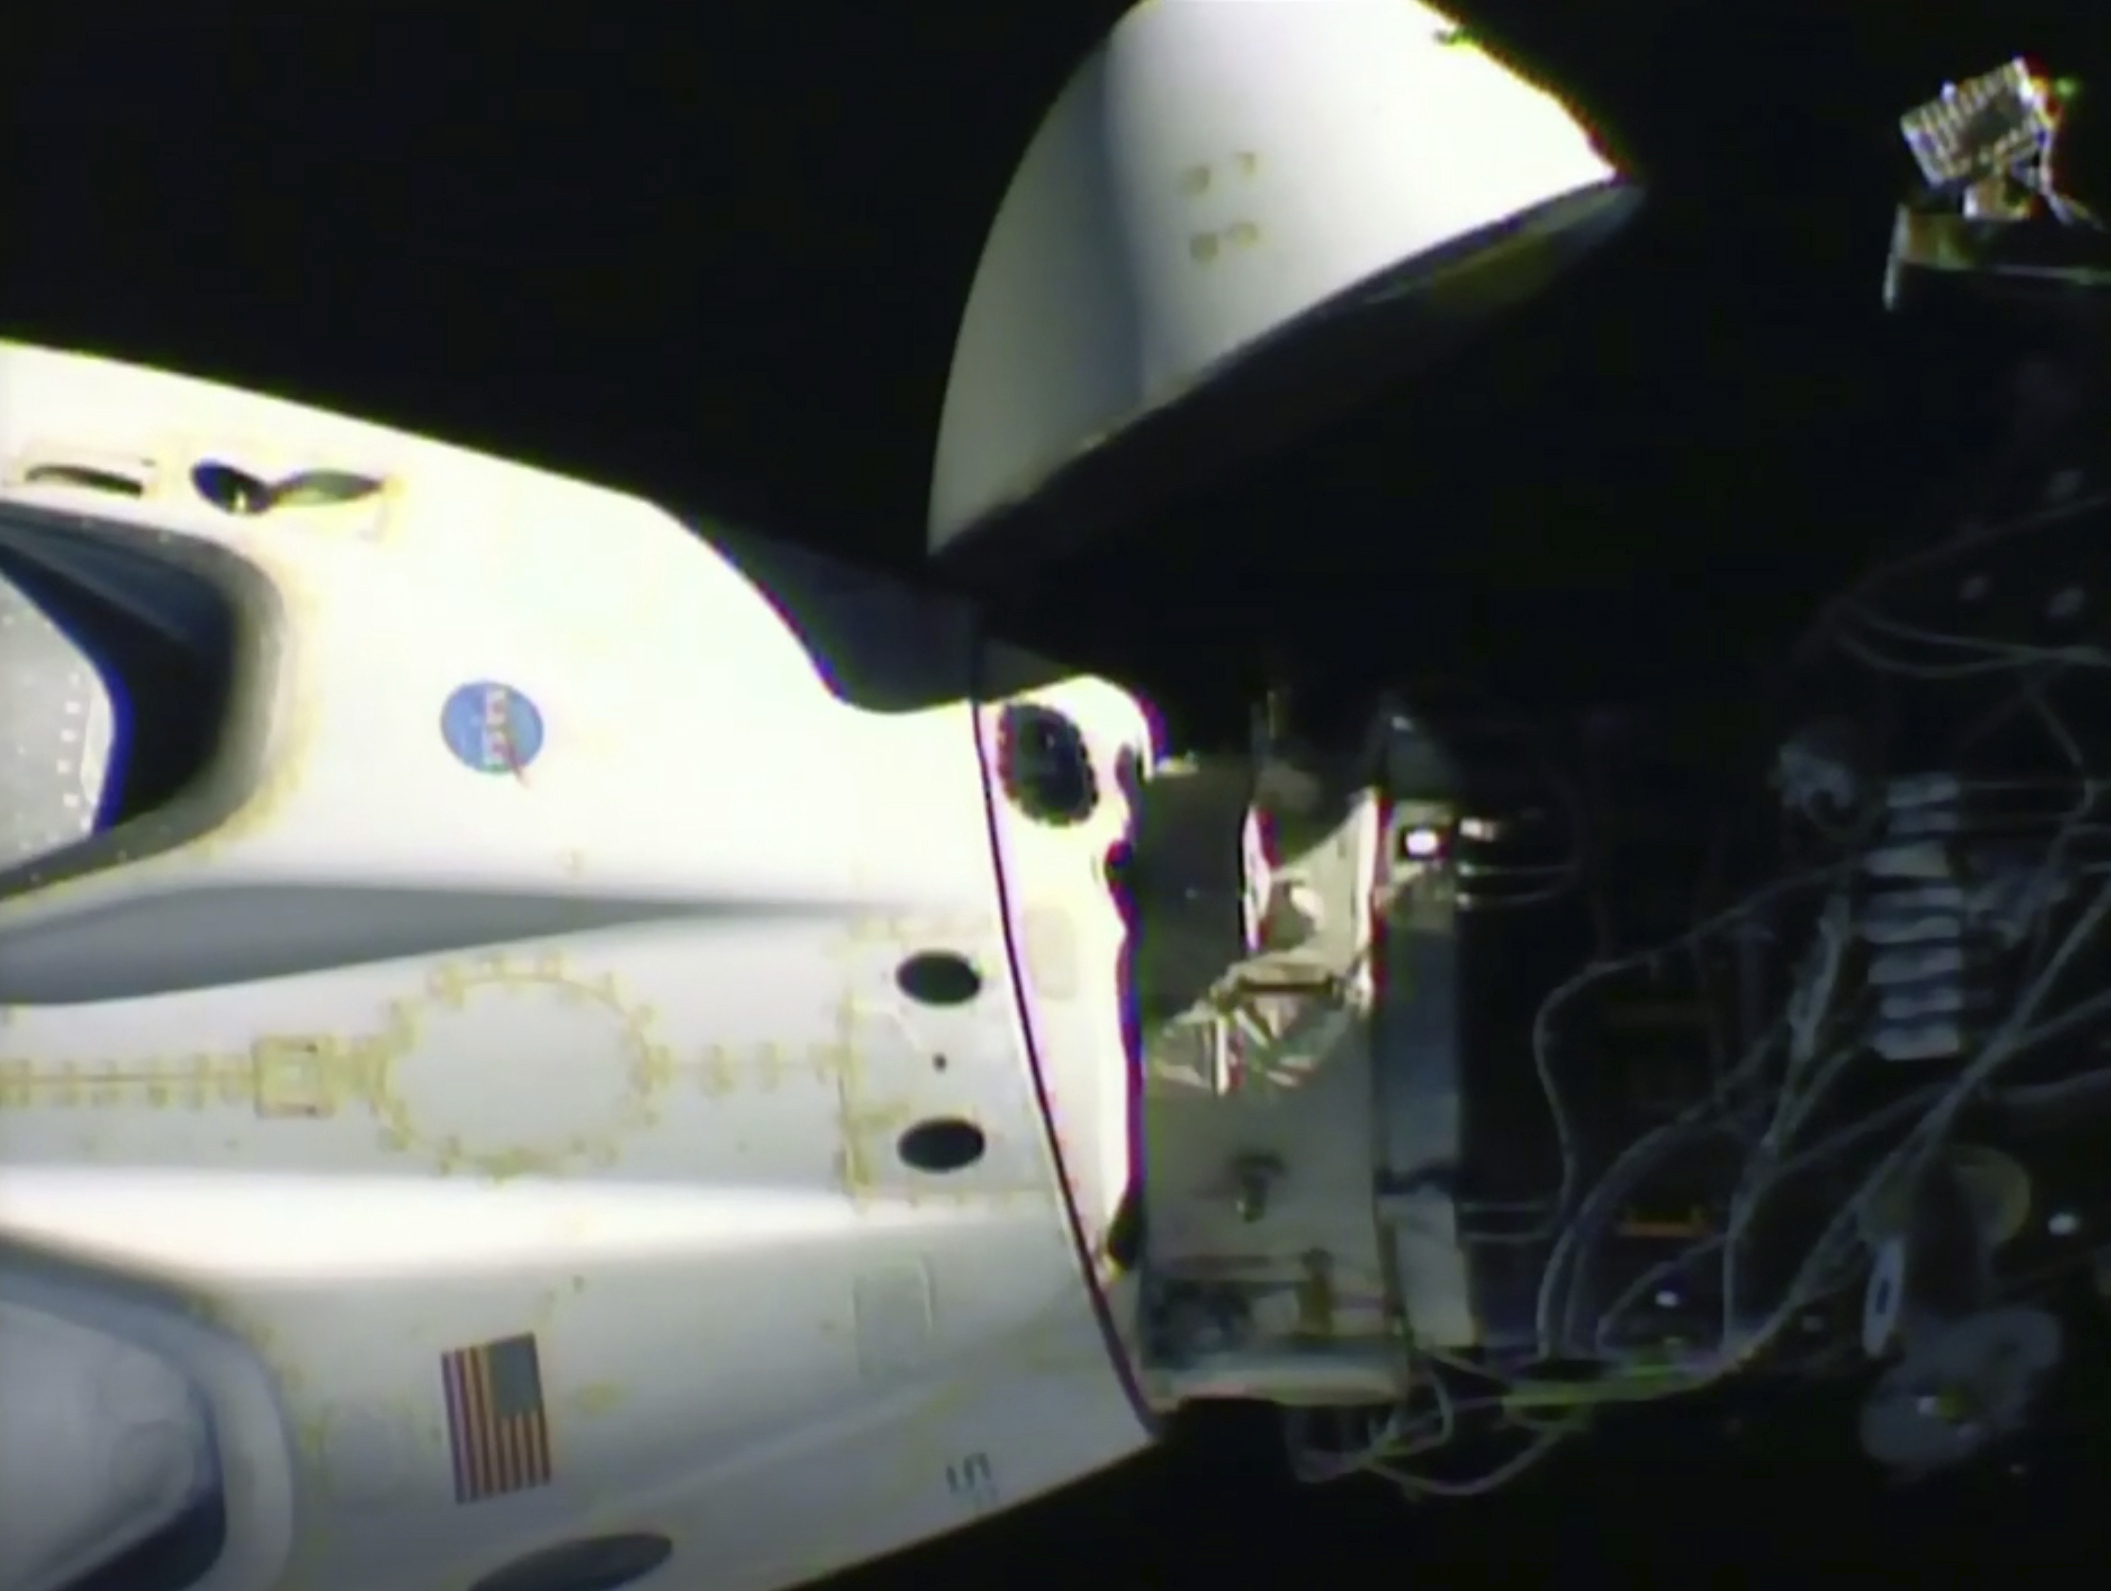 SpaceX's Dragon spacecraft is strewn off the west coast of Florida